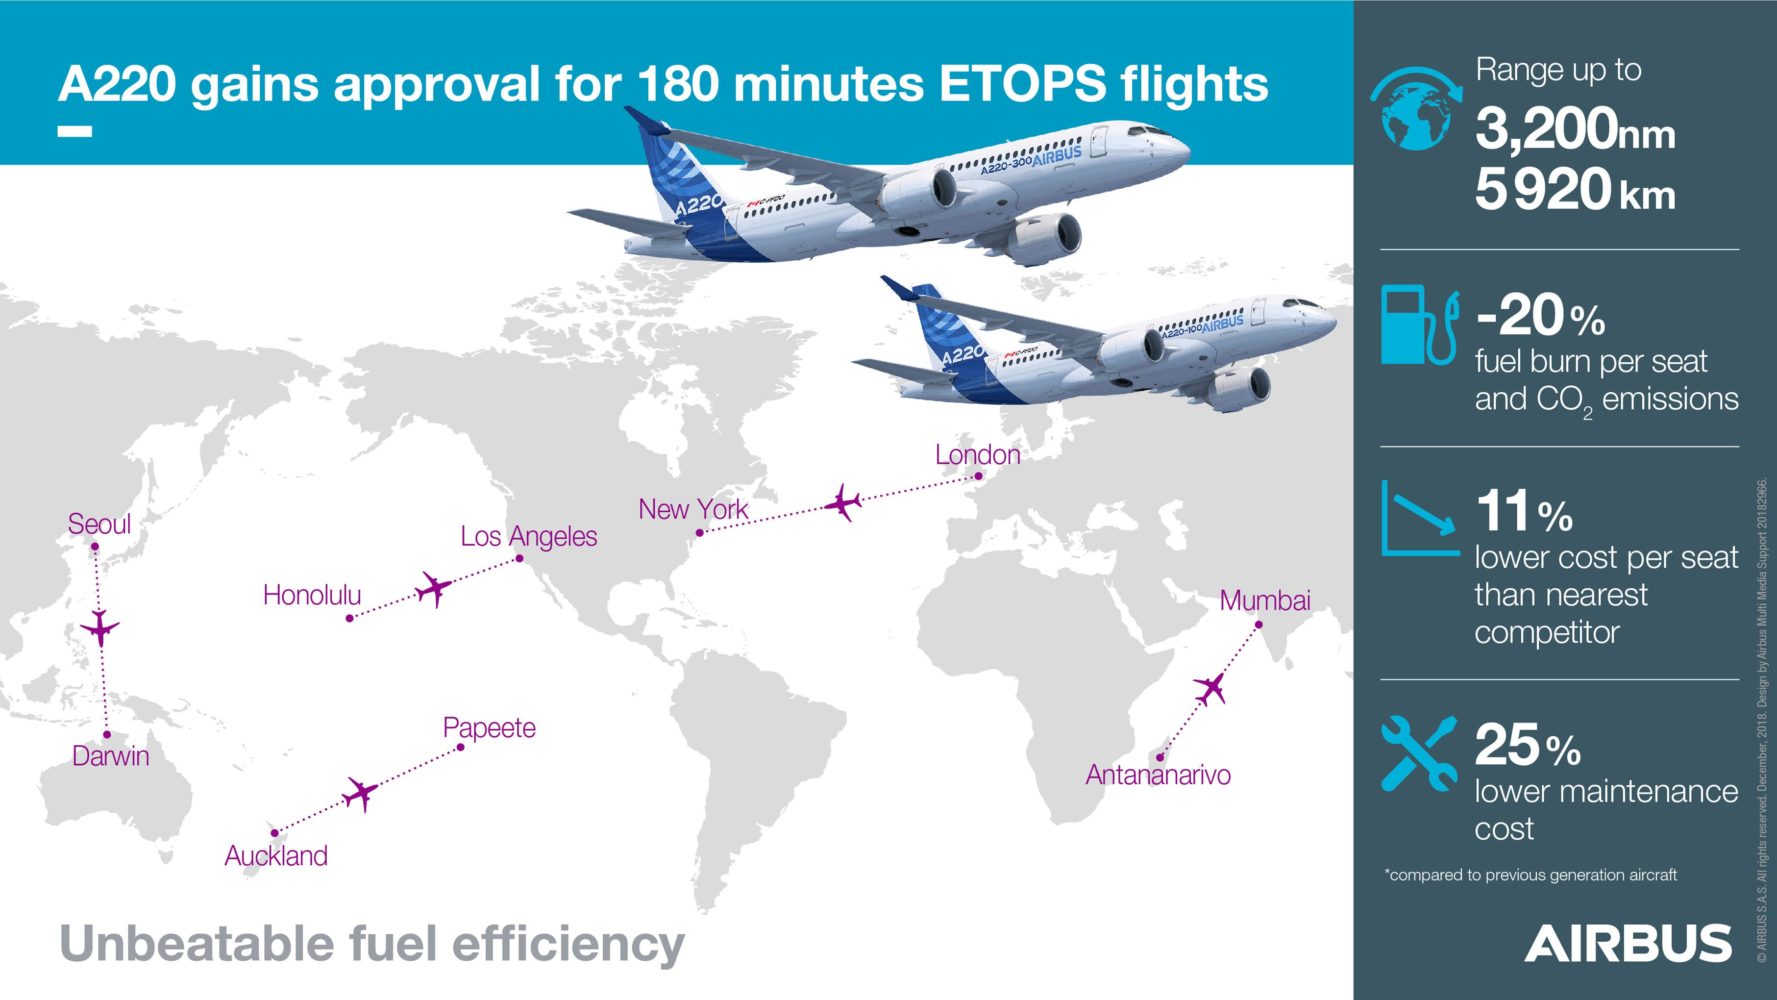 Airbus A220 gains greater capability with ETOPS 180 approval